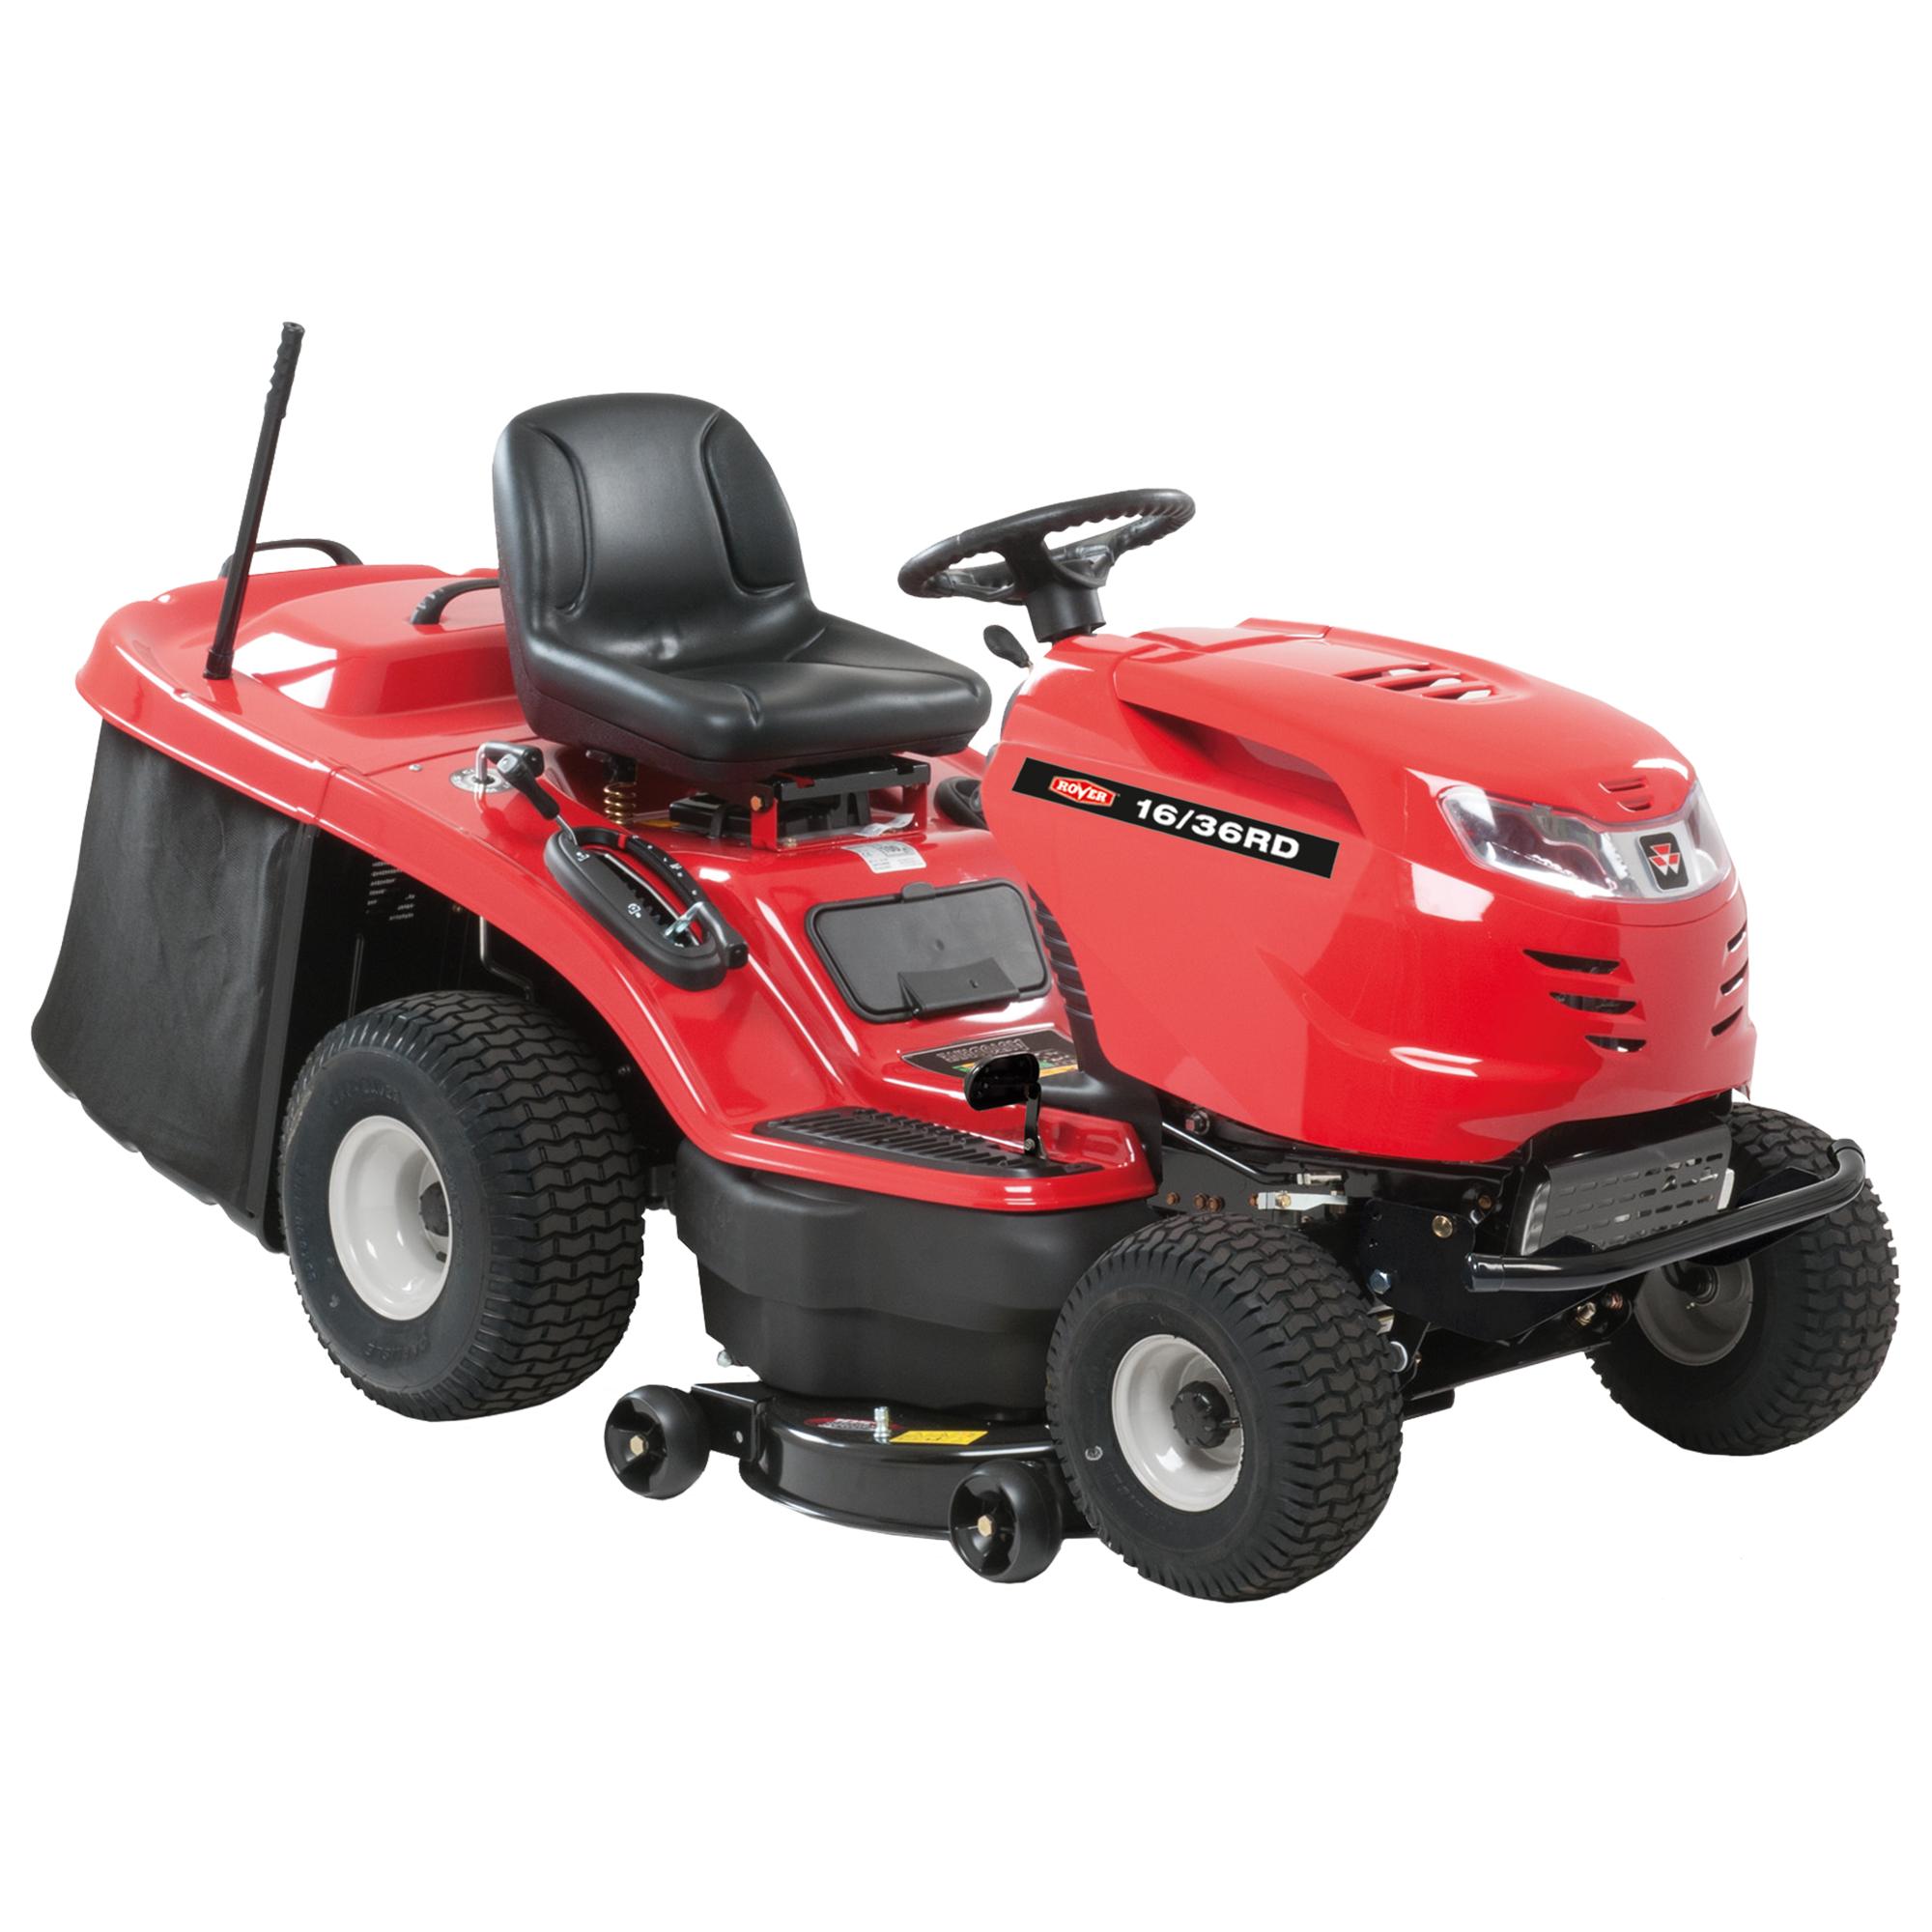 Rover Mowers Logo - Rover 16 36RD Ride On Mower [13HD90GE395] $199.00 : Mighty